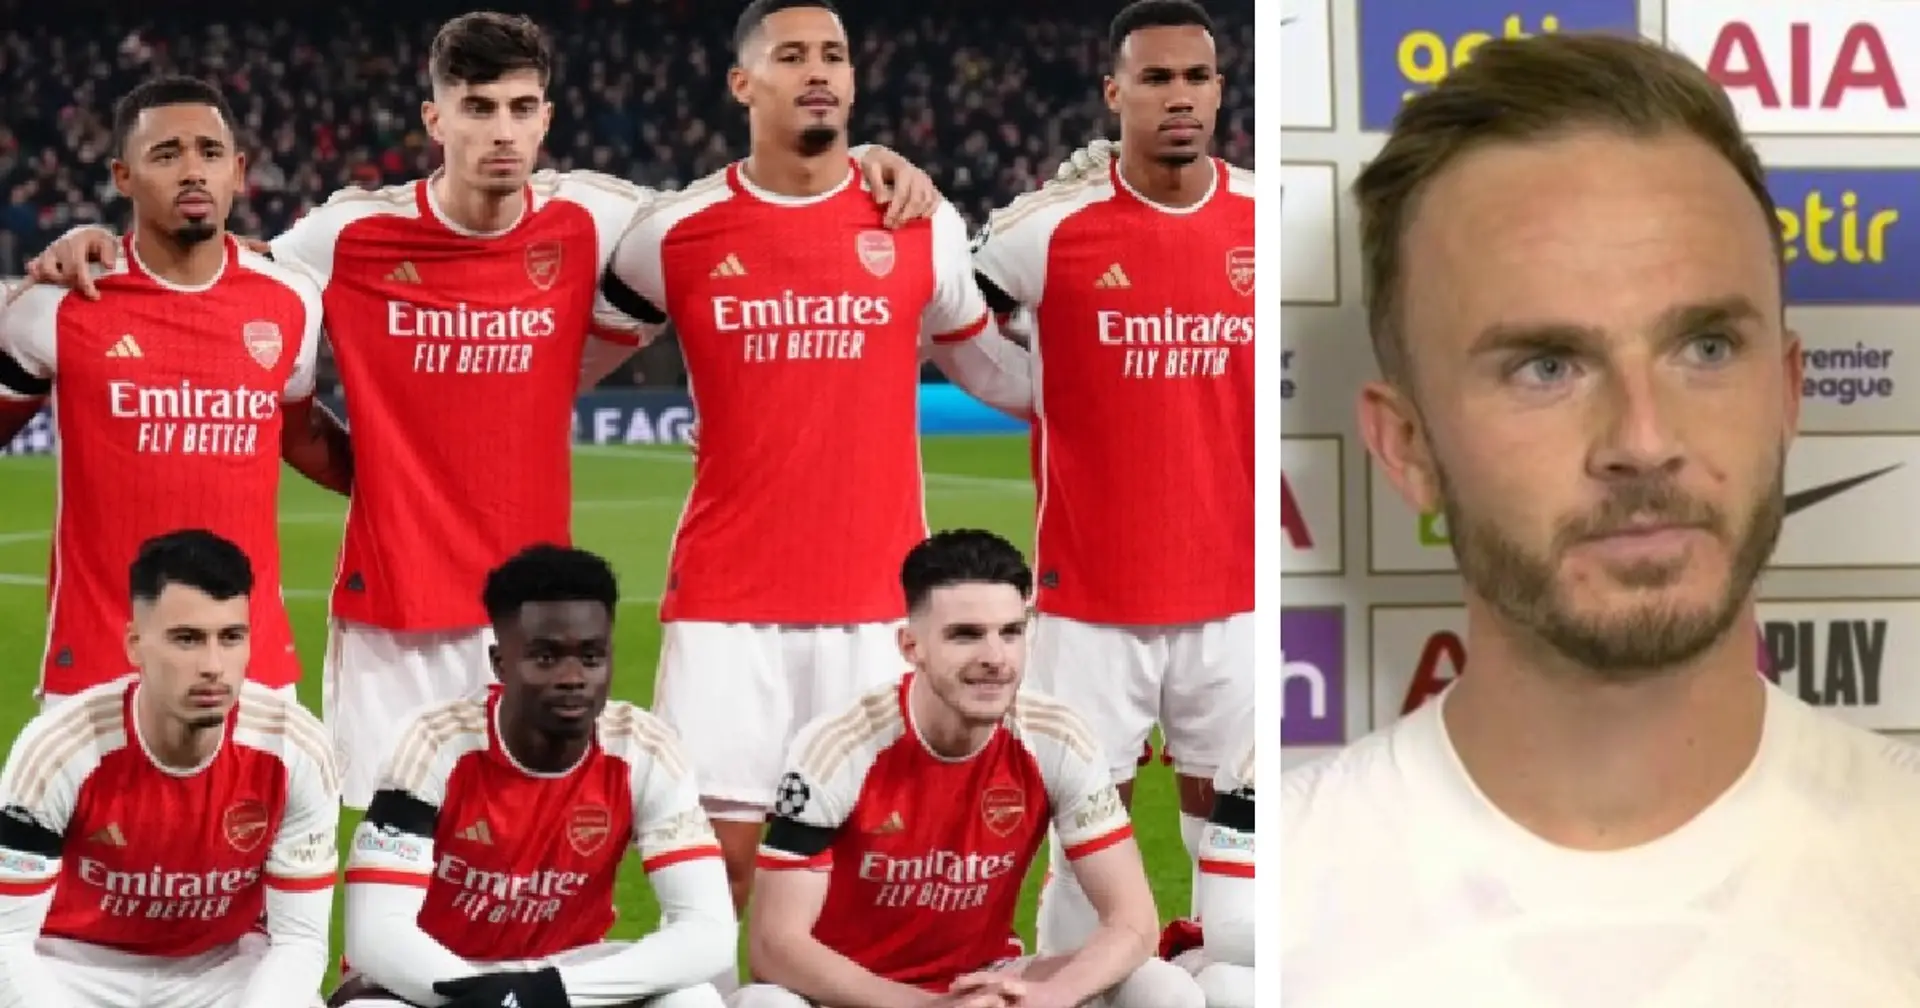 'I hate that he plays for them': Maddison wishes ONE Arsenal player was at Tottenham 